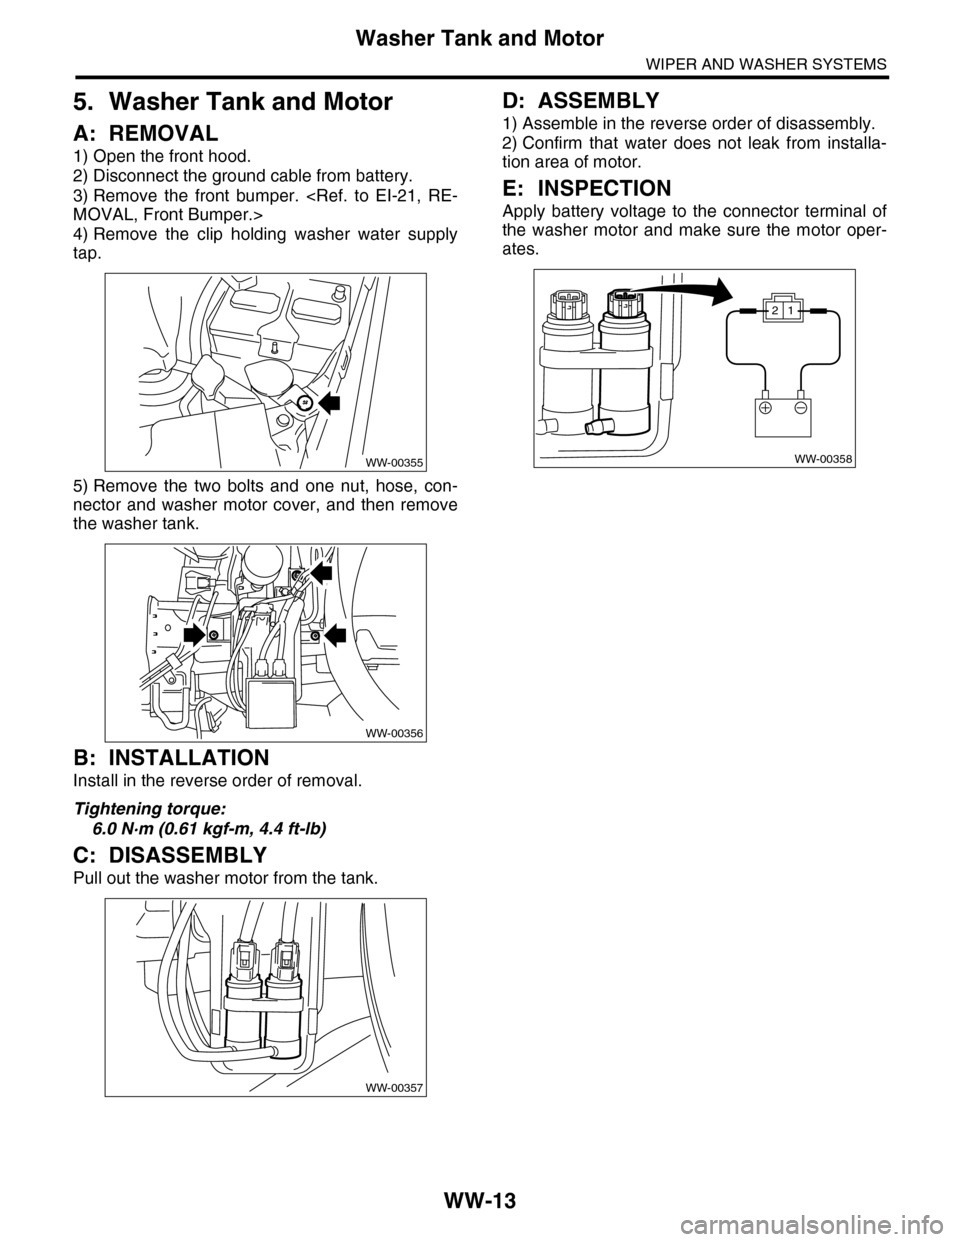 SUBARU TRIBECA 2009 1.G Service Workshop Manual WW-13
Washer Tank and Motor
WIPER AND WASHER SYSTEMS
5. Washer Tank and Motor
A: REMOVAL
1) Open the front hood.
2) Disconnect the ground cable from battery.
3) Remove  the  front  bumper.  <Ref.  to 